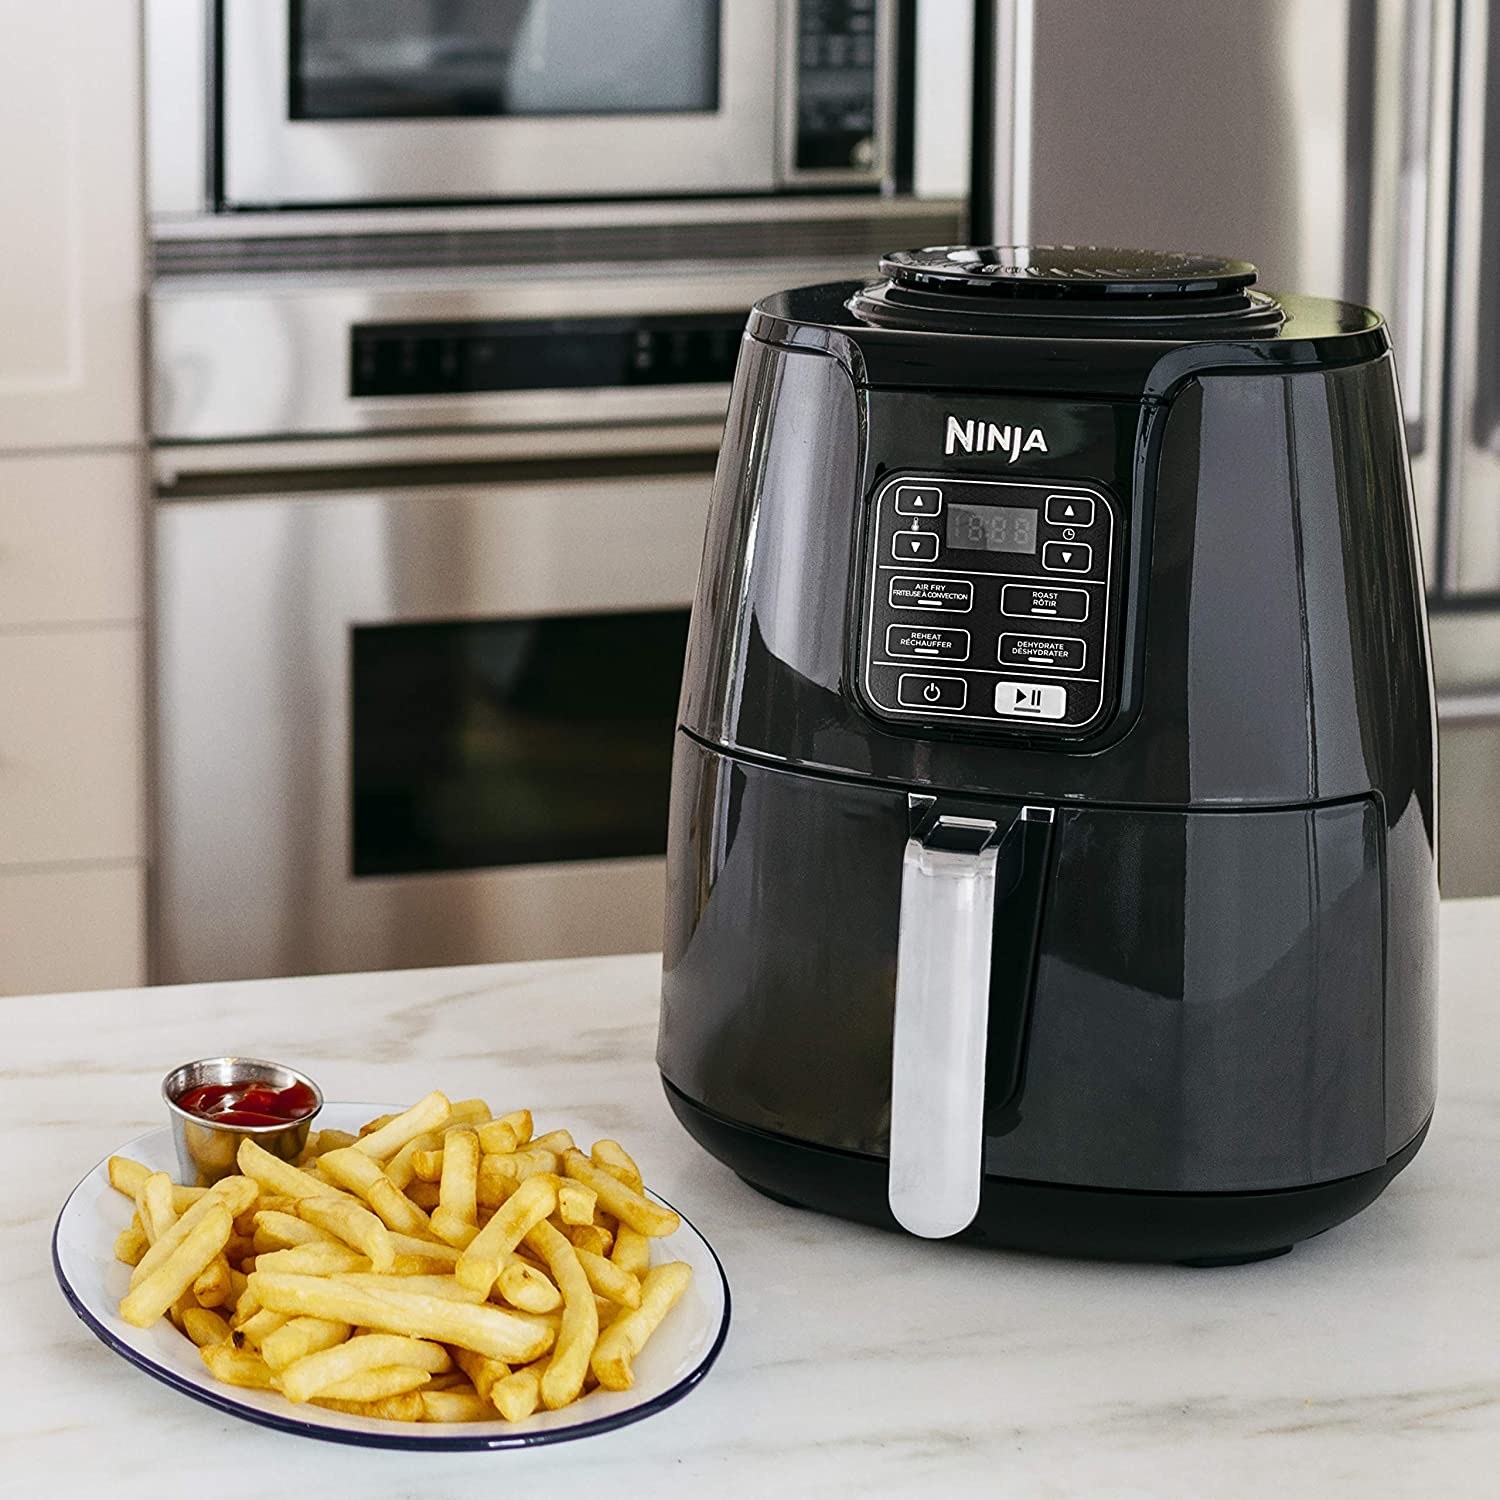 The air fryer next to a plate of fries